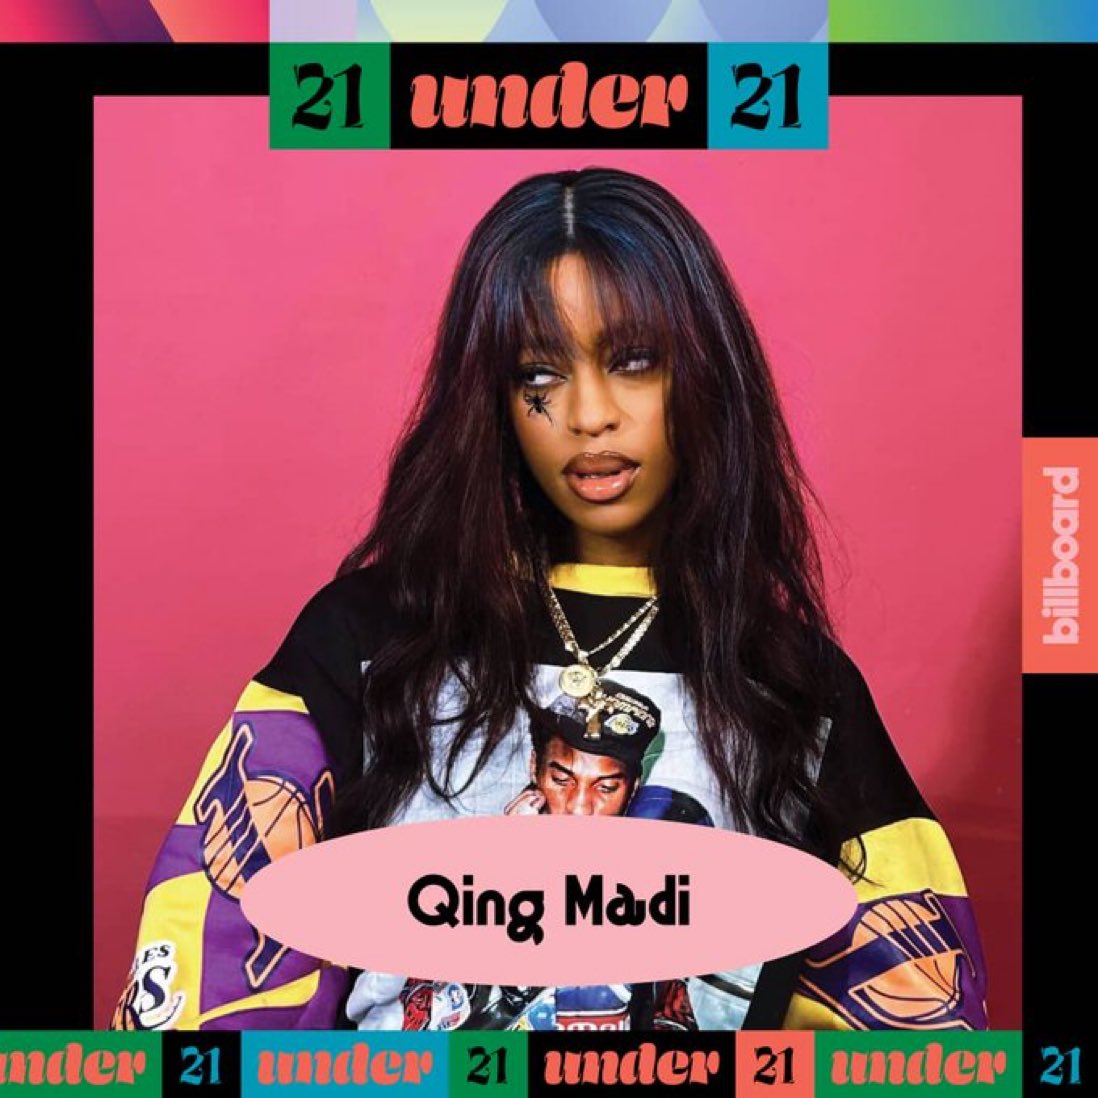 Yo
Tweeps so Chimamanda Pearl Chukwuma, popularly known as Qing Madi, a Nigerian singer, has been named to Billboard’s 21 Under 21 list for 2024

At 17, Qingmadi's journey with Columbia Records/Bu Vision & Jton Music is just beginning, and it's already so inspiring.